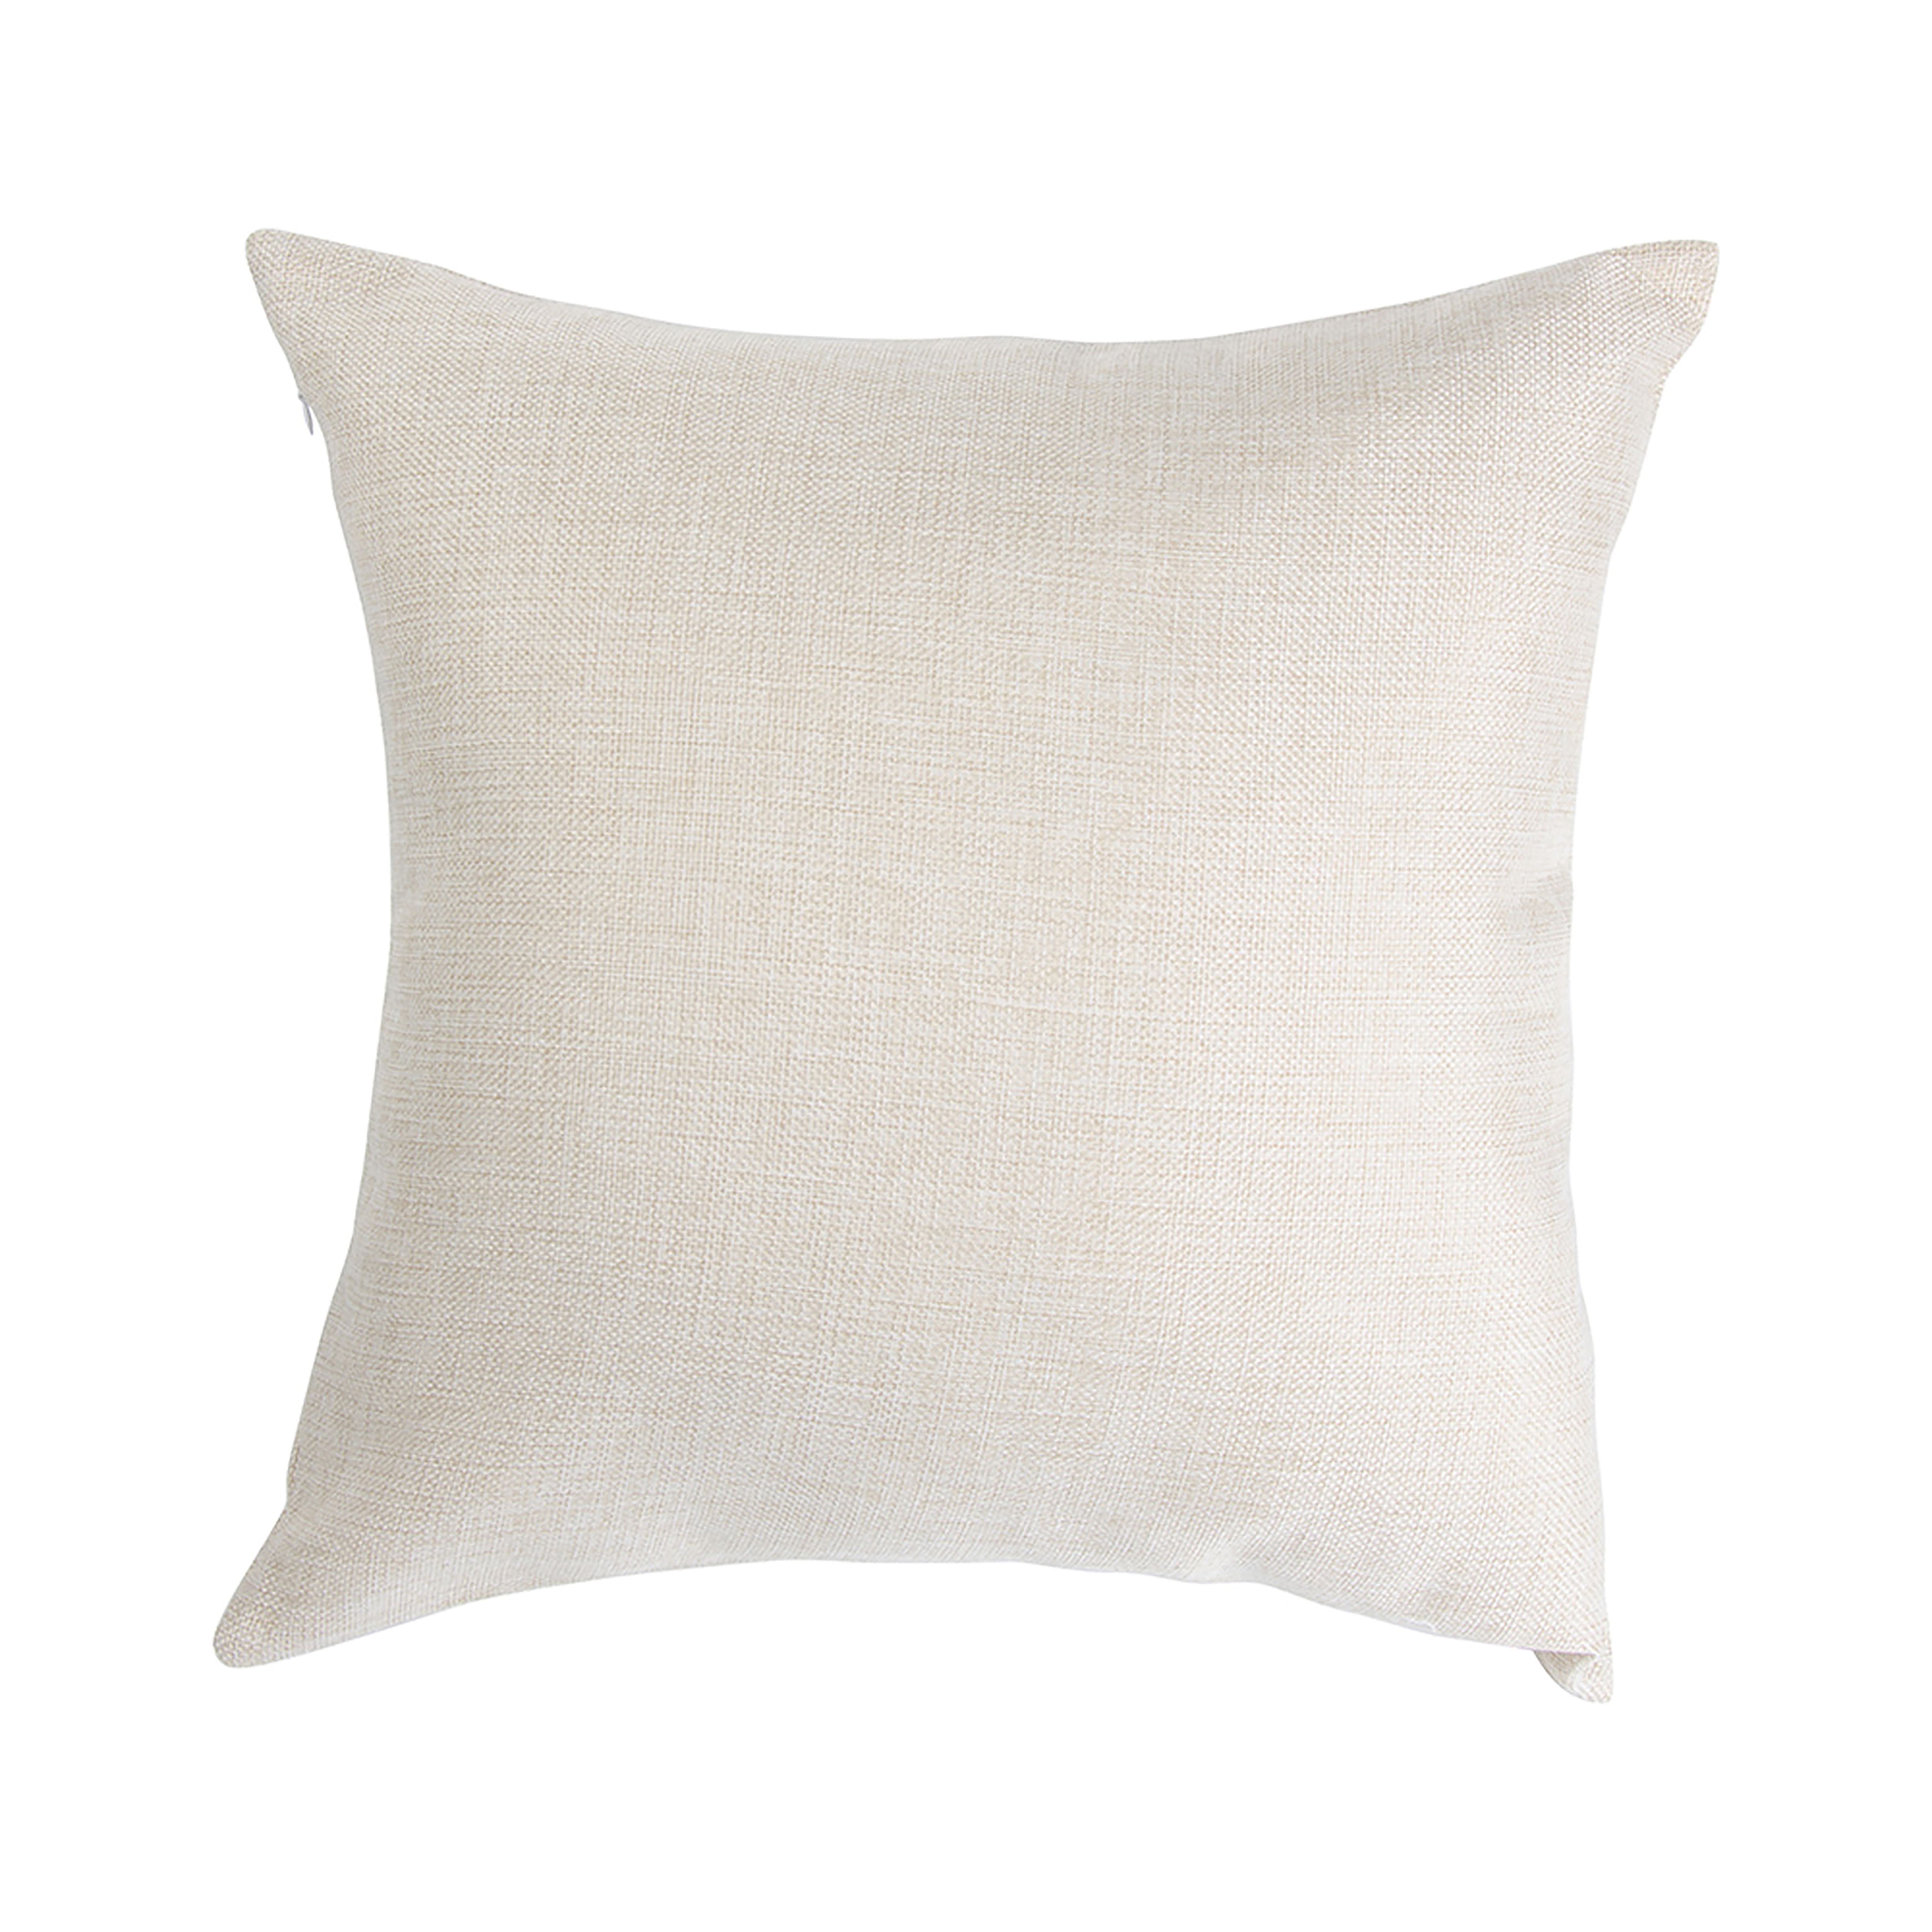 Craft Express Beige Square Linen-Like Pillow Cover, 4ct.